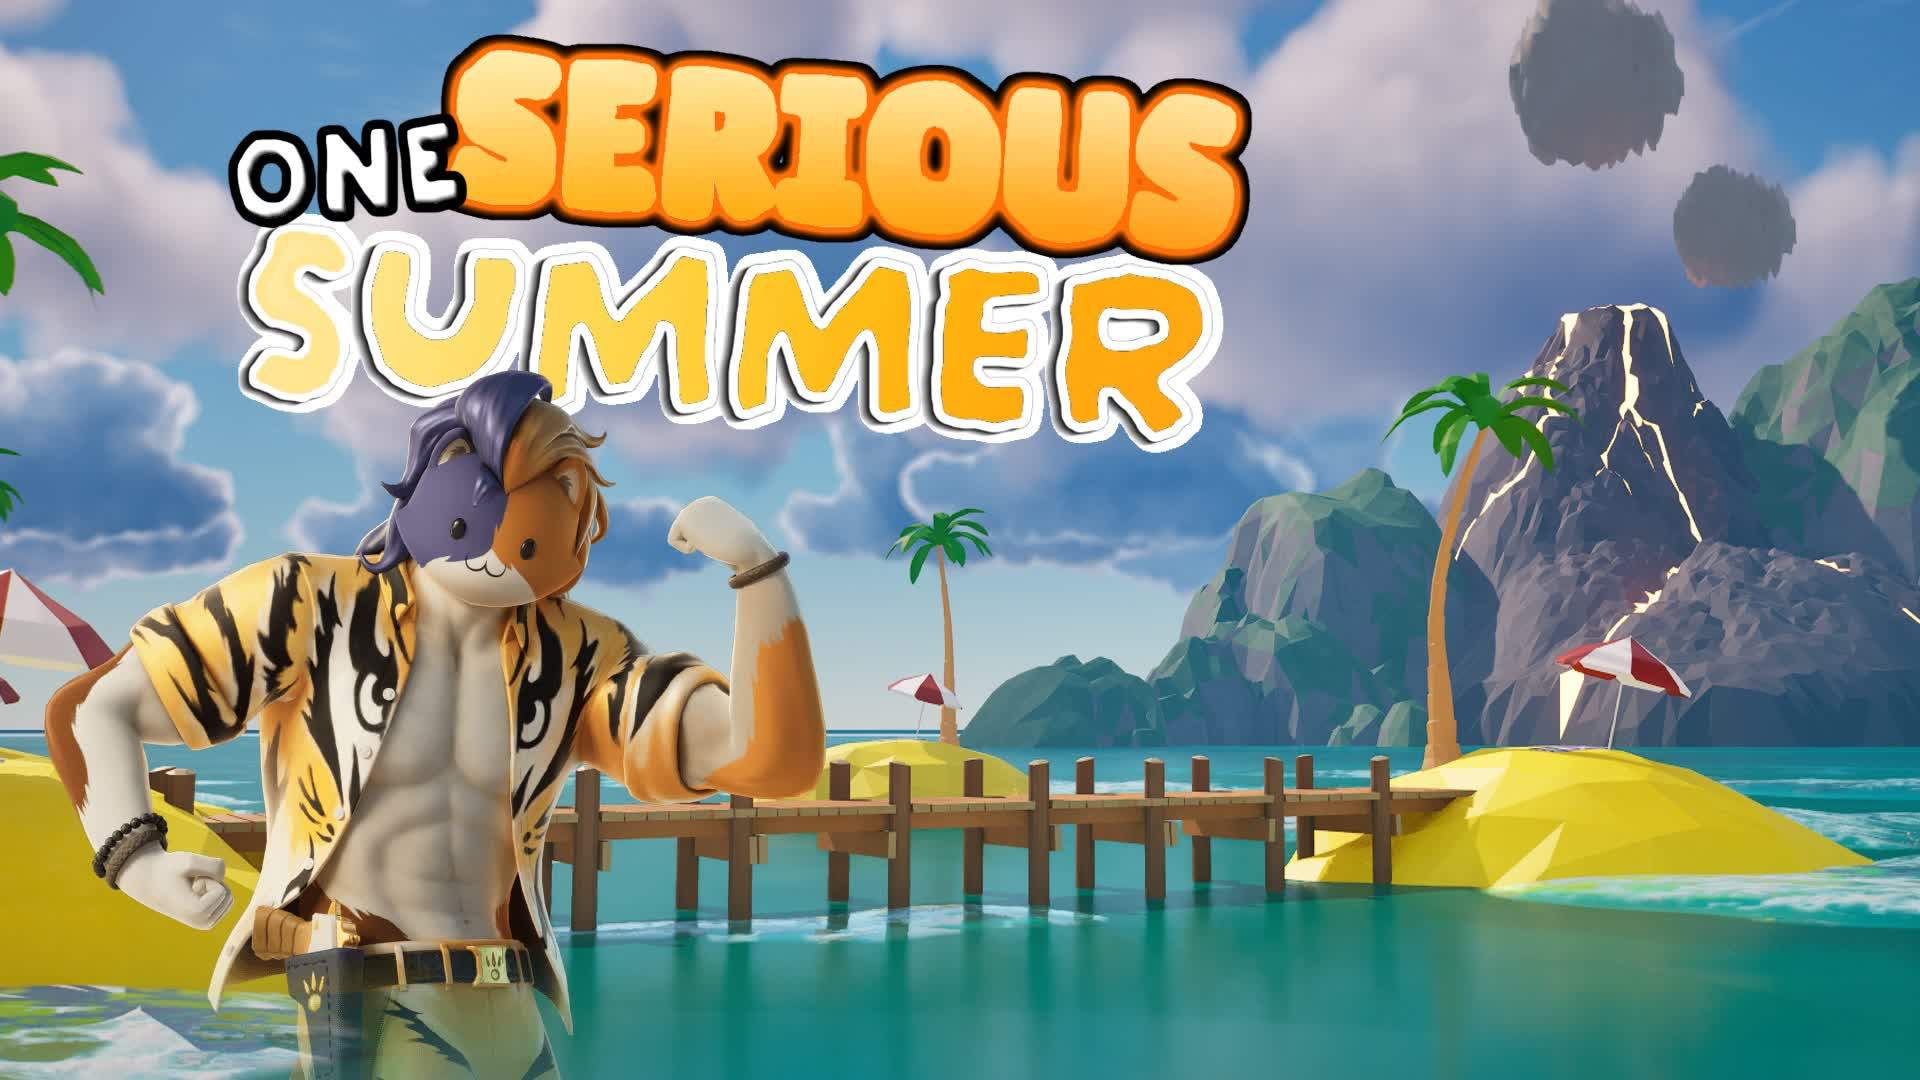 One SERIOUS Summer!